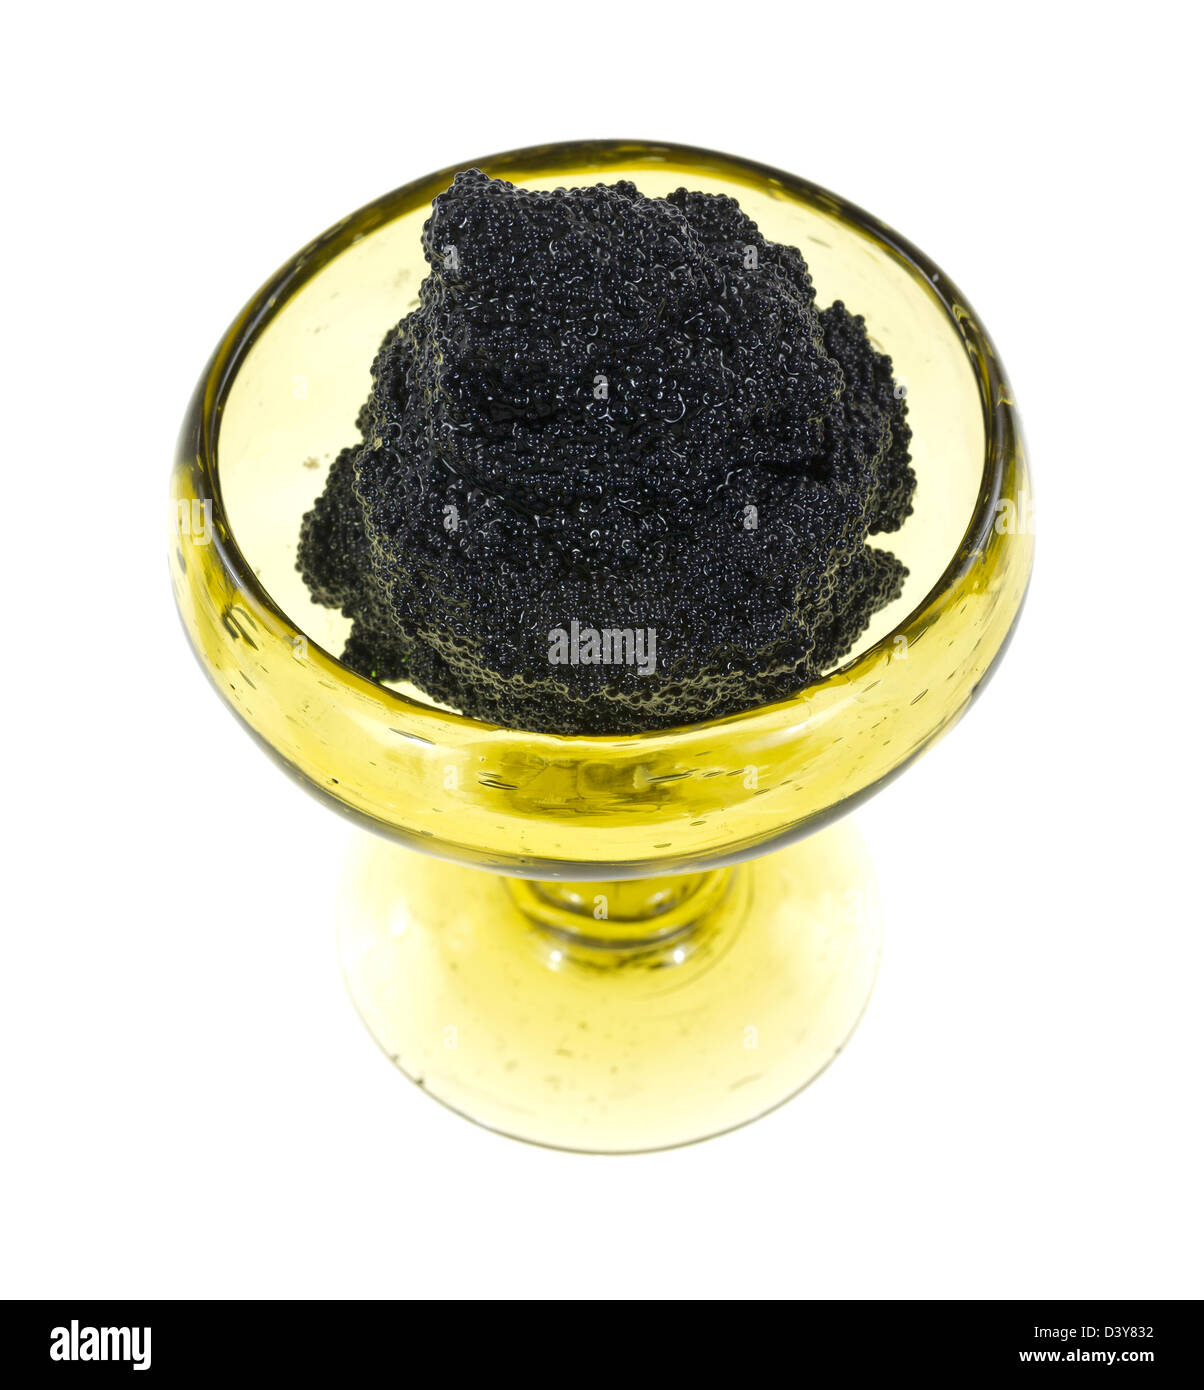 A small hand made glass goblet filled with black caviar on a white background. Stock Photo